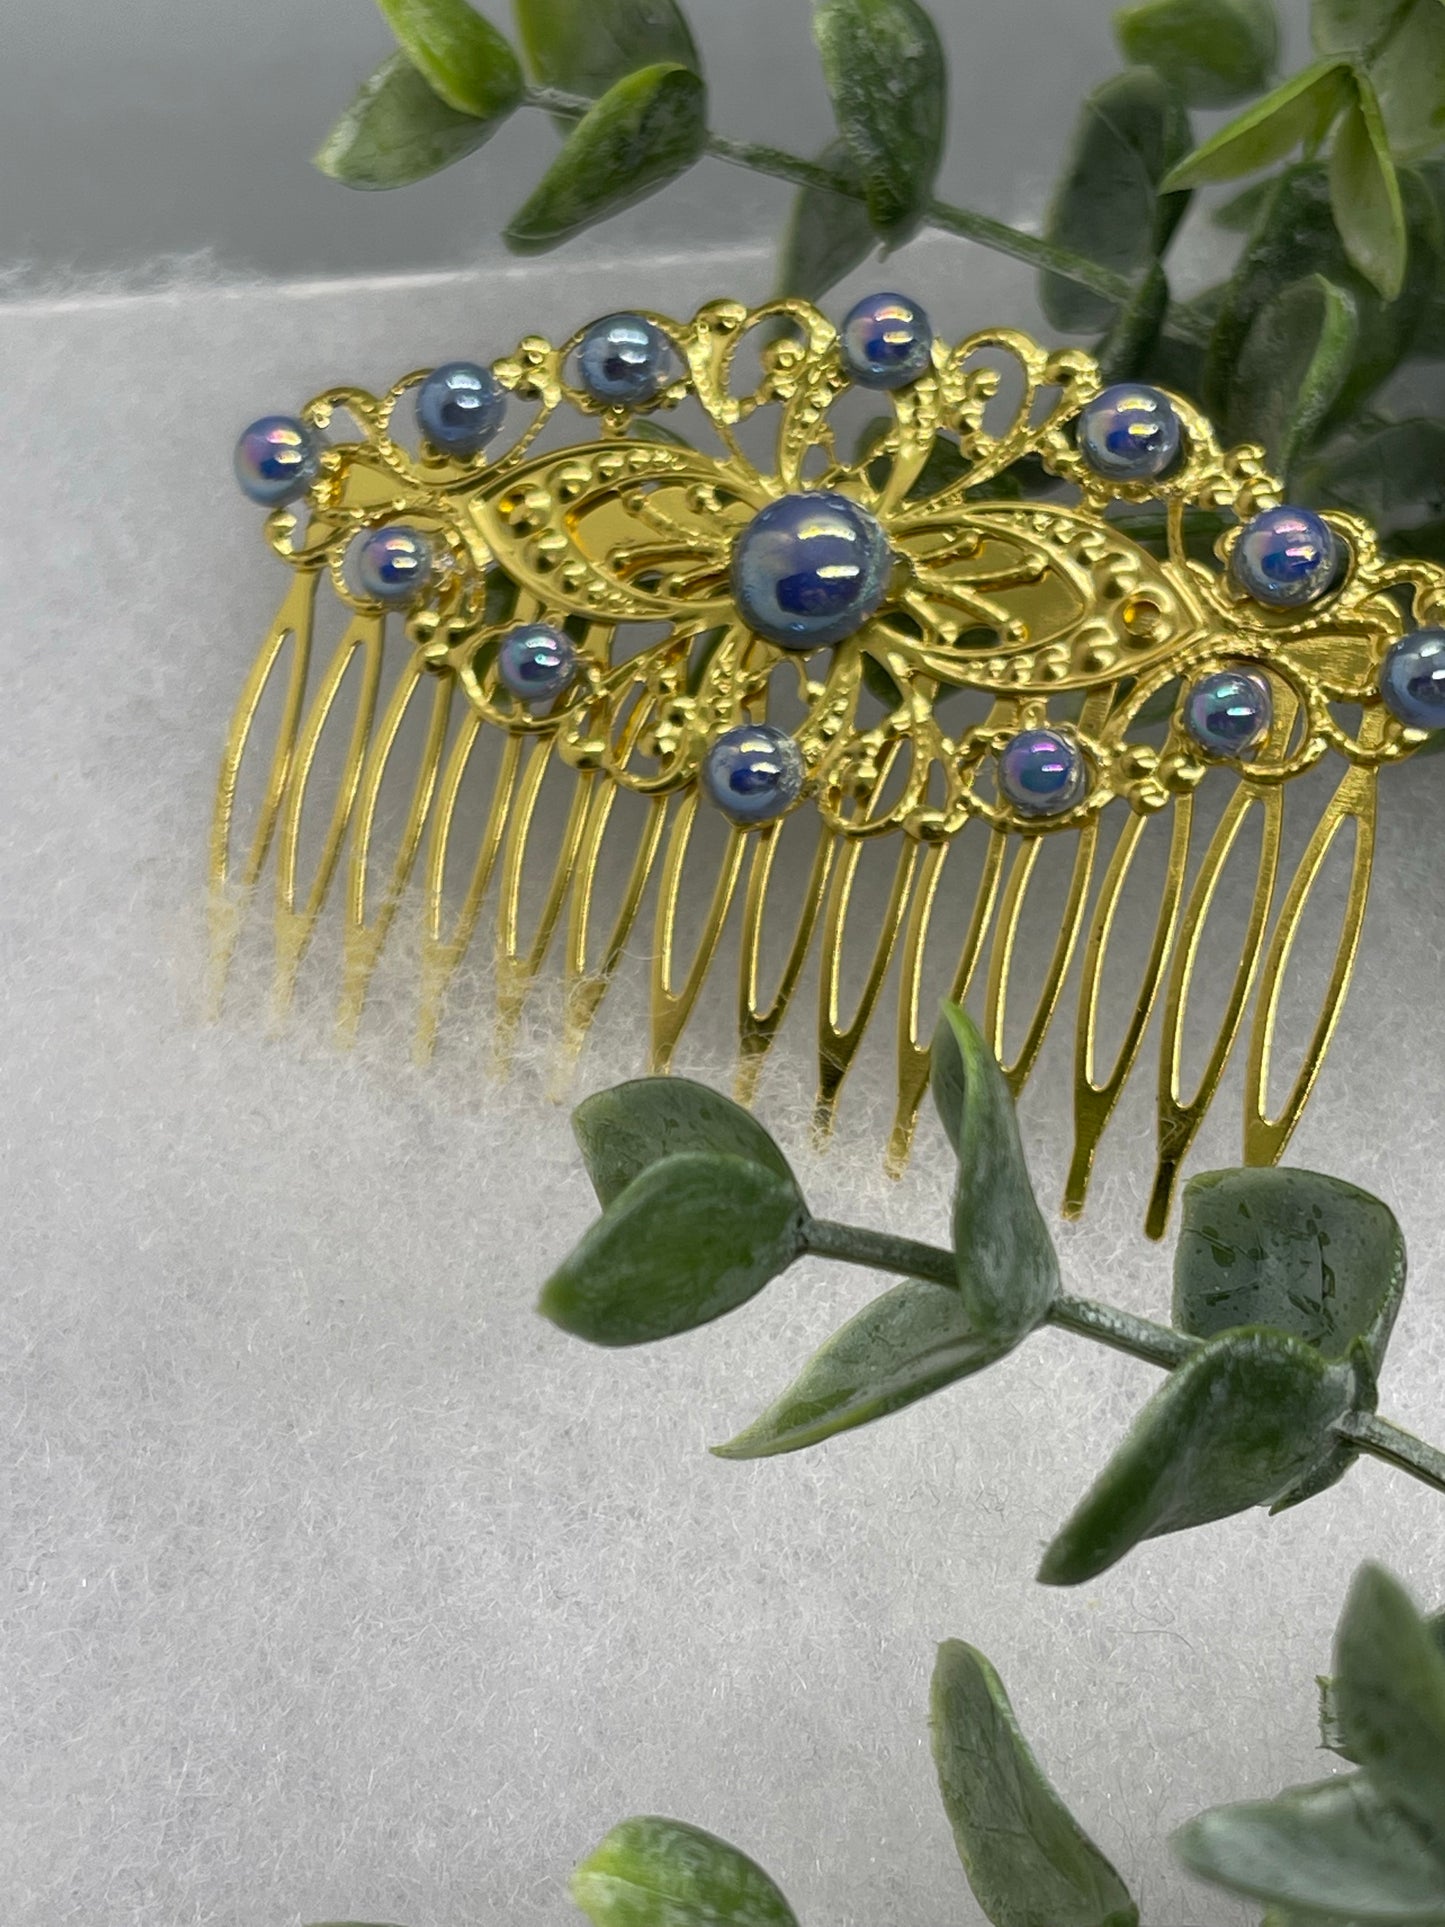 Blue iridescent Pearl vintage style Gold tone side comb hair accessory accessories gift birthday event formal bridesmaid wedding 3.5” Metal side Comb